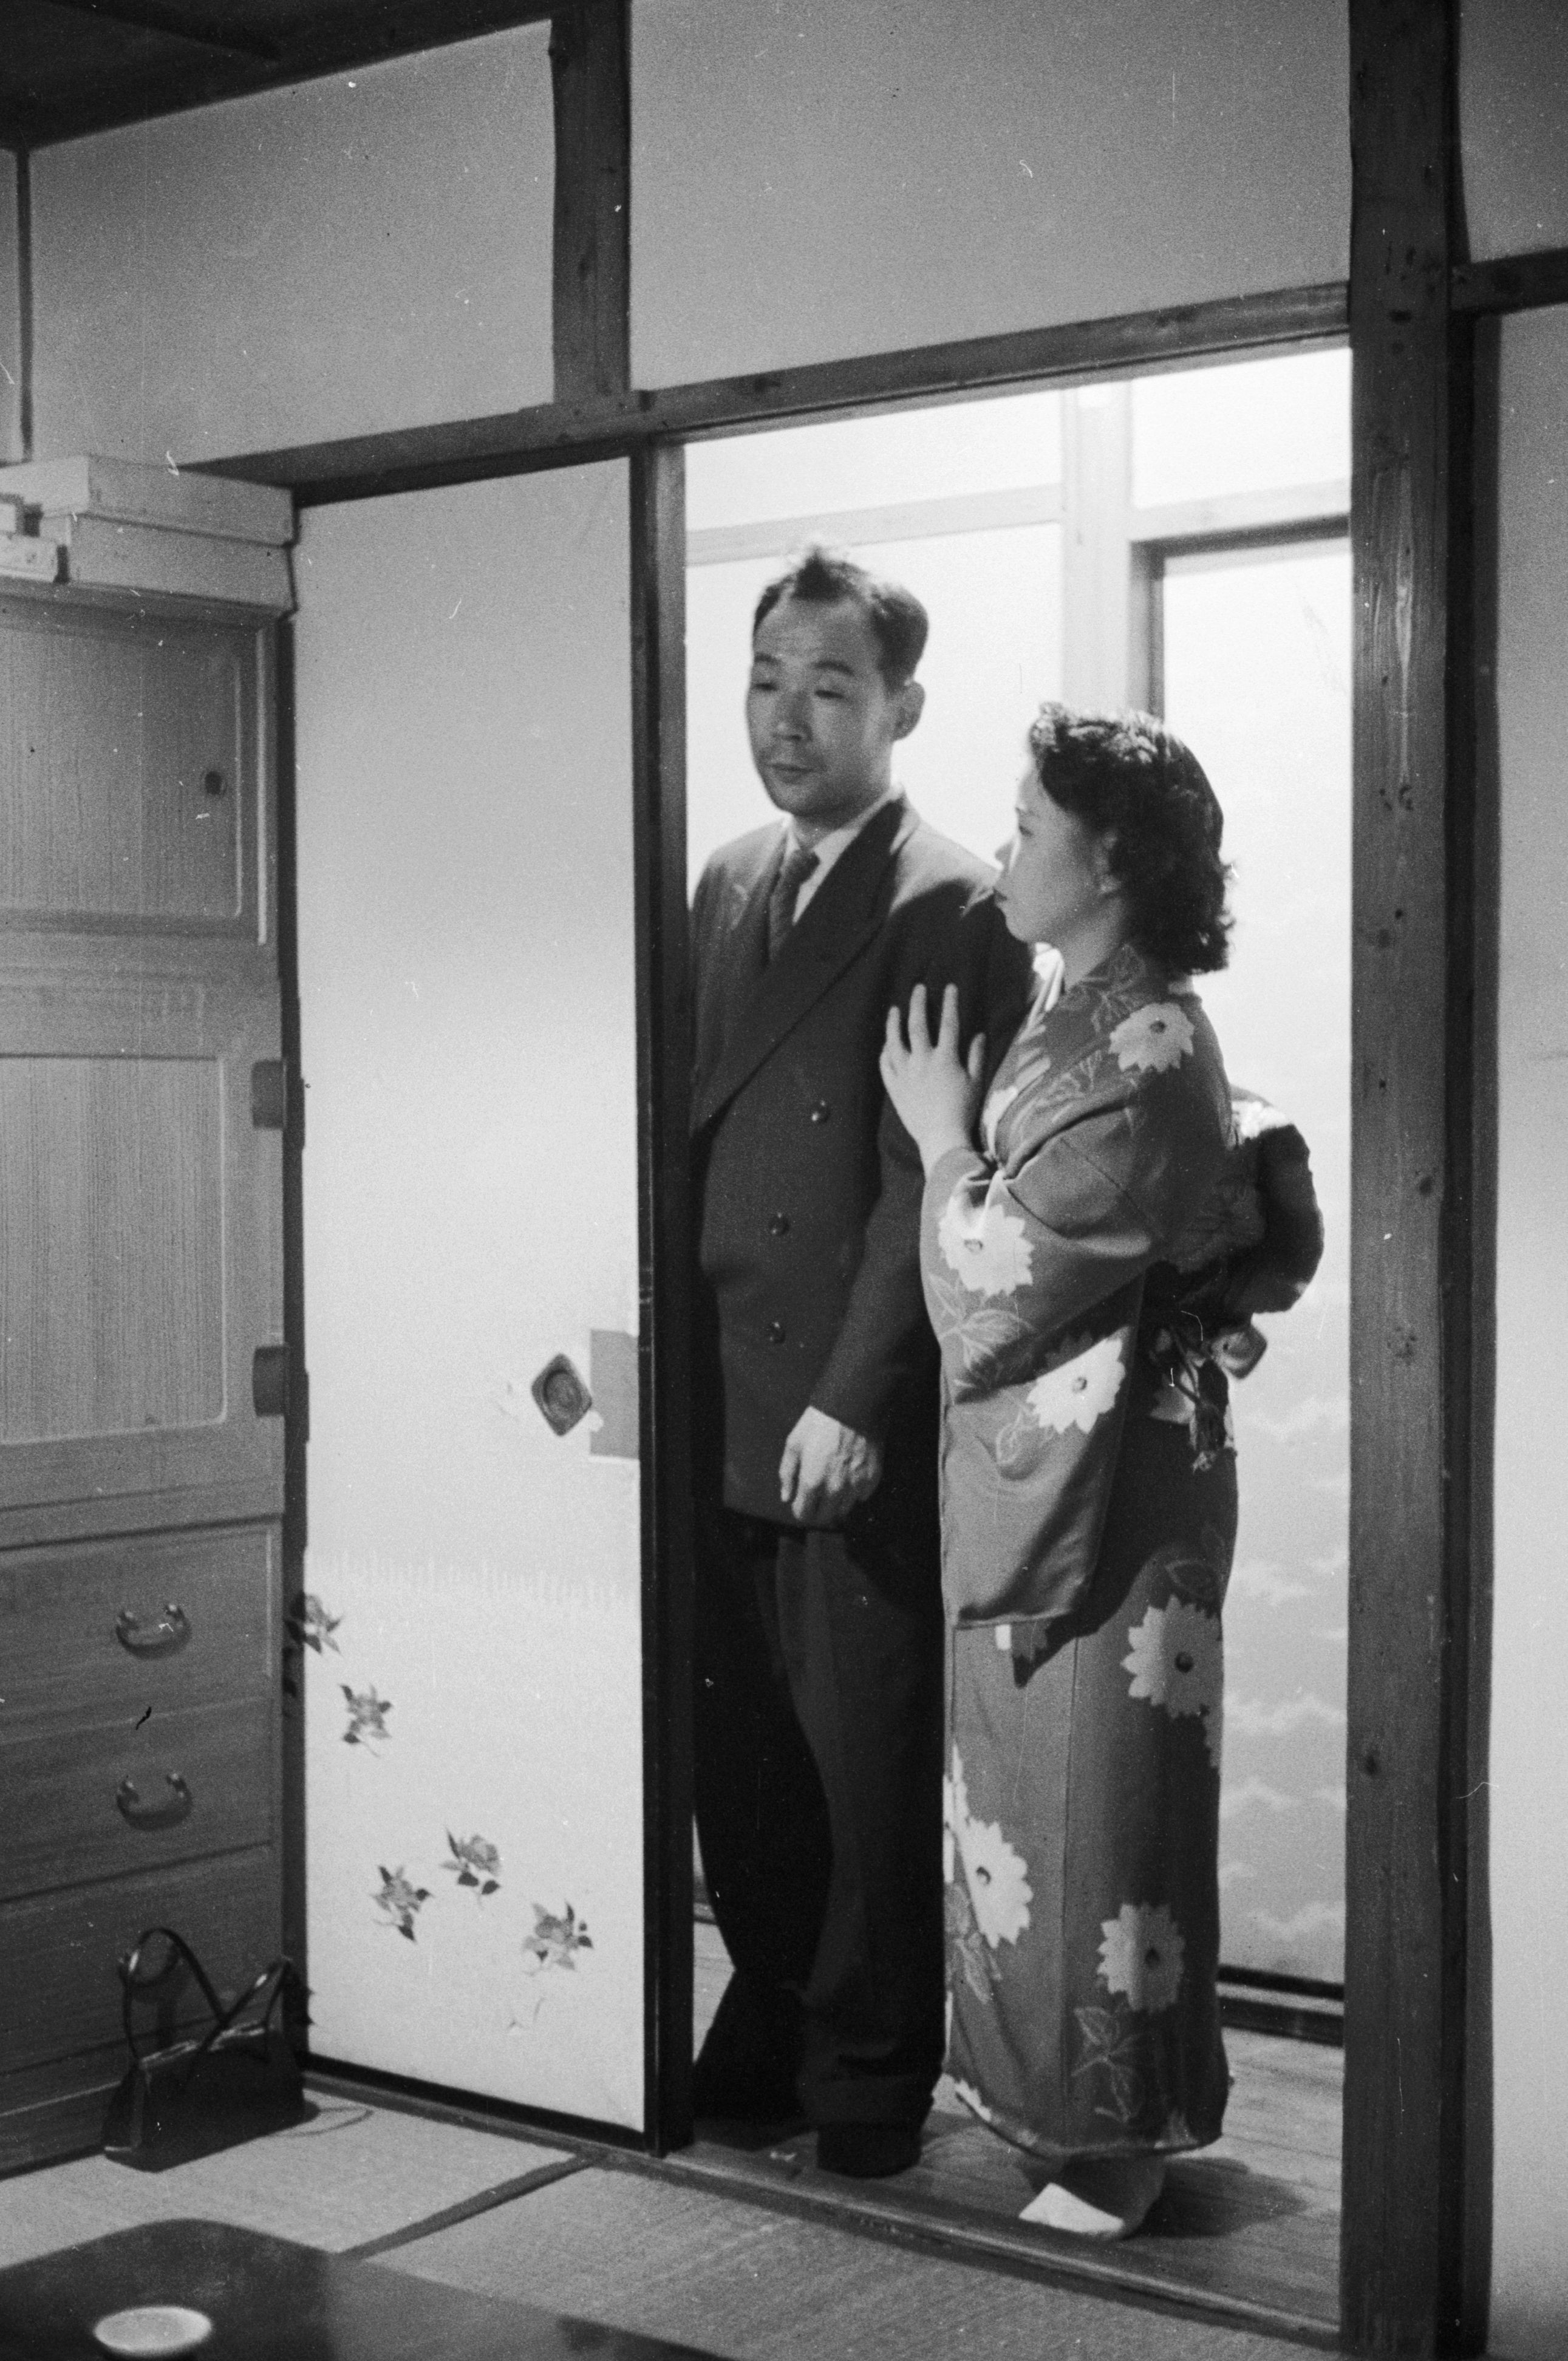 A prostitute from Yoshiwara shows her client into a bedroom. Photo: Orlando/Three Lions/Getty Images